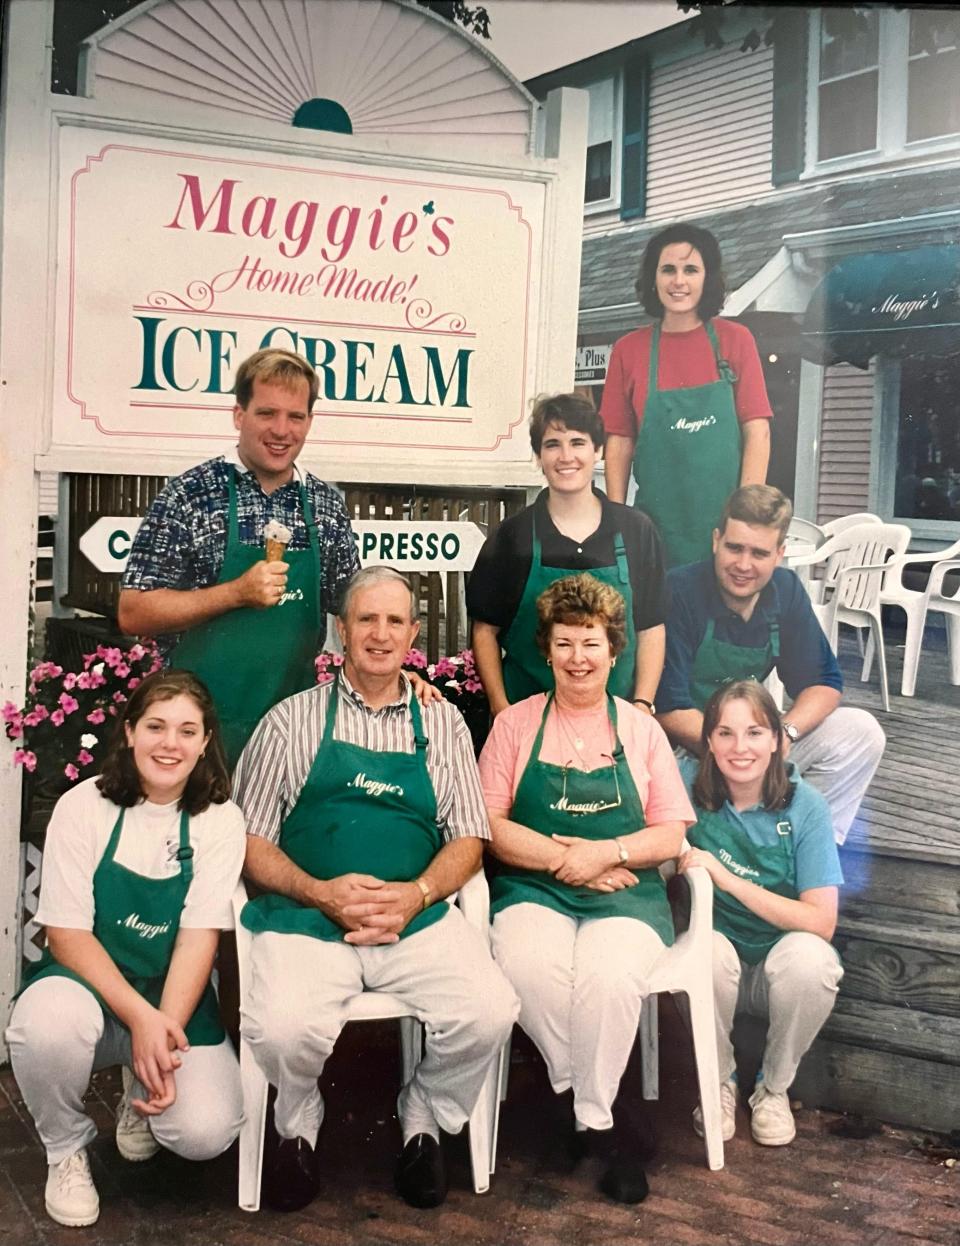 The Sweeney Family: Maura, left, Sean, John and Maggie, Sue, Holly, Brian, Colleen Martin, right, pose in front of Maggie's homemade Ice Cream, Colleen Martin's parent's ice cream shop in Cape Cod.